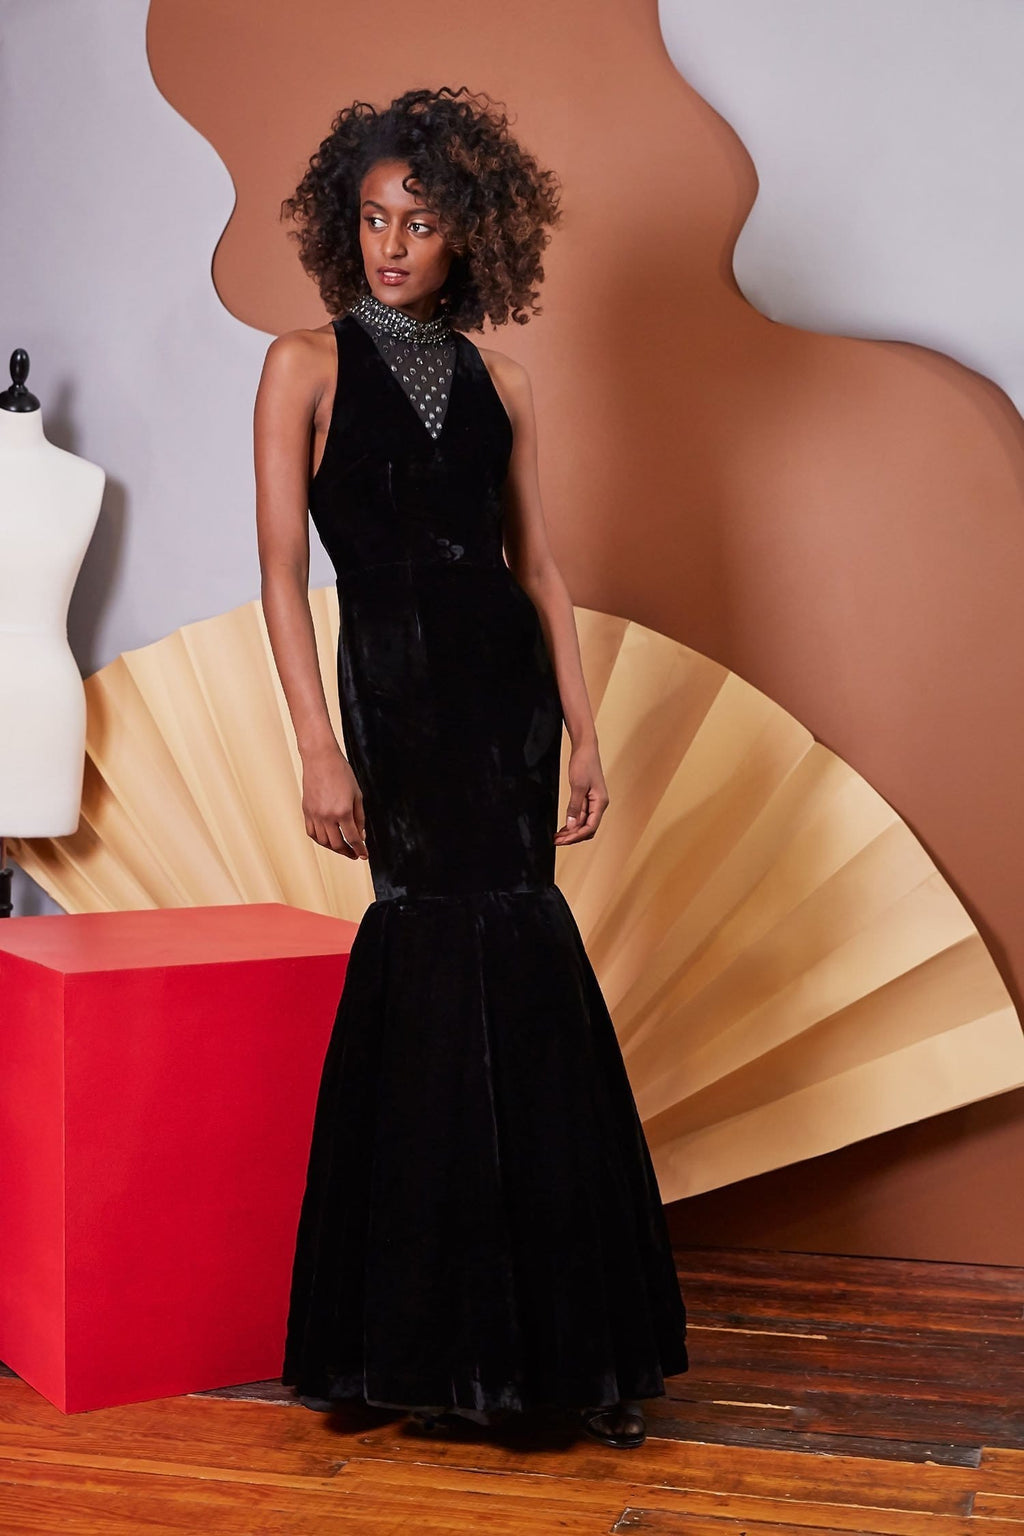 Lavanya Coodly Apparel & Accessories > Clothing > Dresses XS / Black Lavanya Coodly Vivian Sleeveless Black Satin Velvet Floor Length Gown with Restrained Beading, See-Through Back